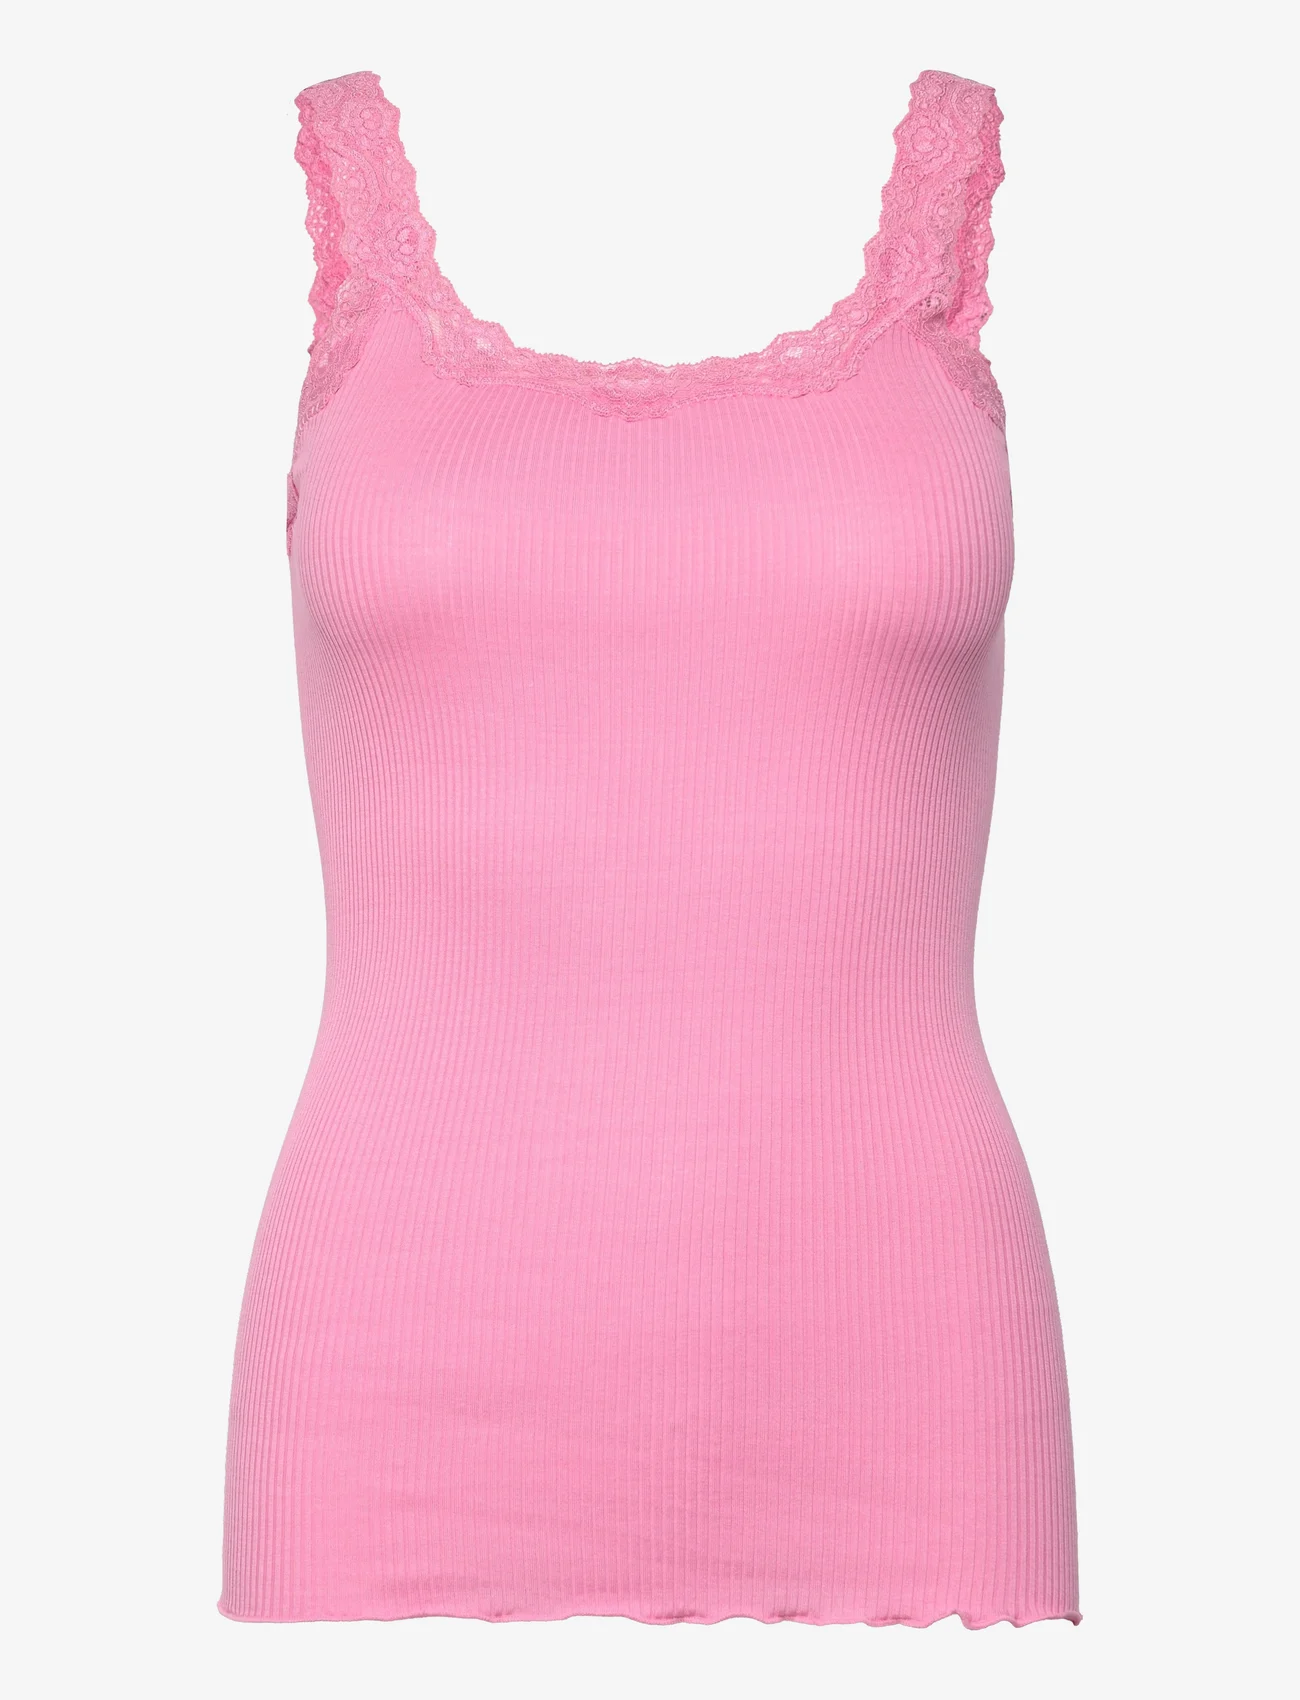 Rosemunde - Silk top w/ lace - sleeveless tops - dolly pink - 0